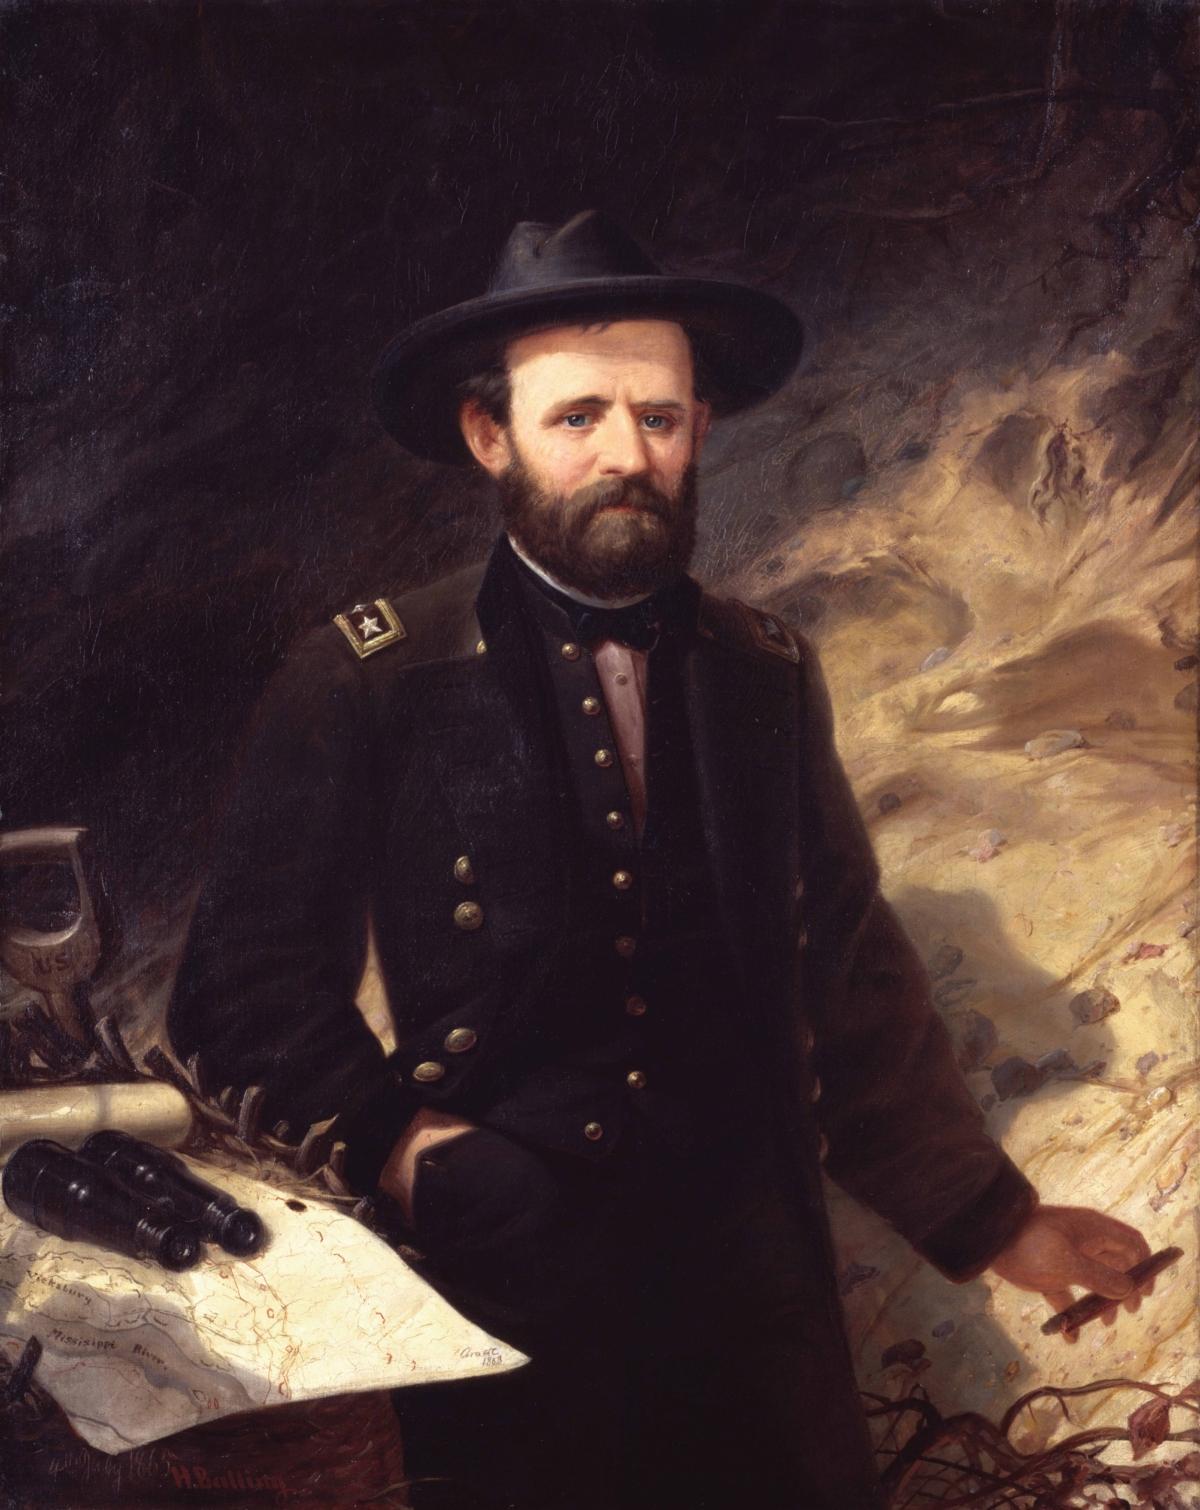 Portrait of Gen. Grant in a trench during the 1863 Siege of Vicksburg, Miss., by artist Ole Peter Hansen Balling, 1865. (Public Domain)